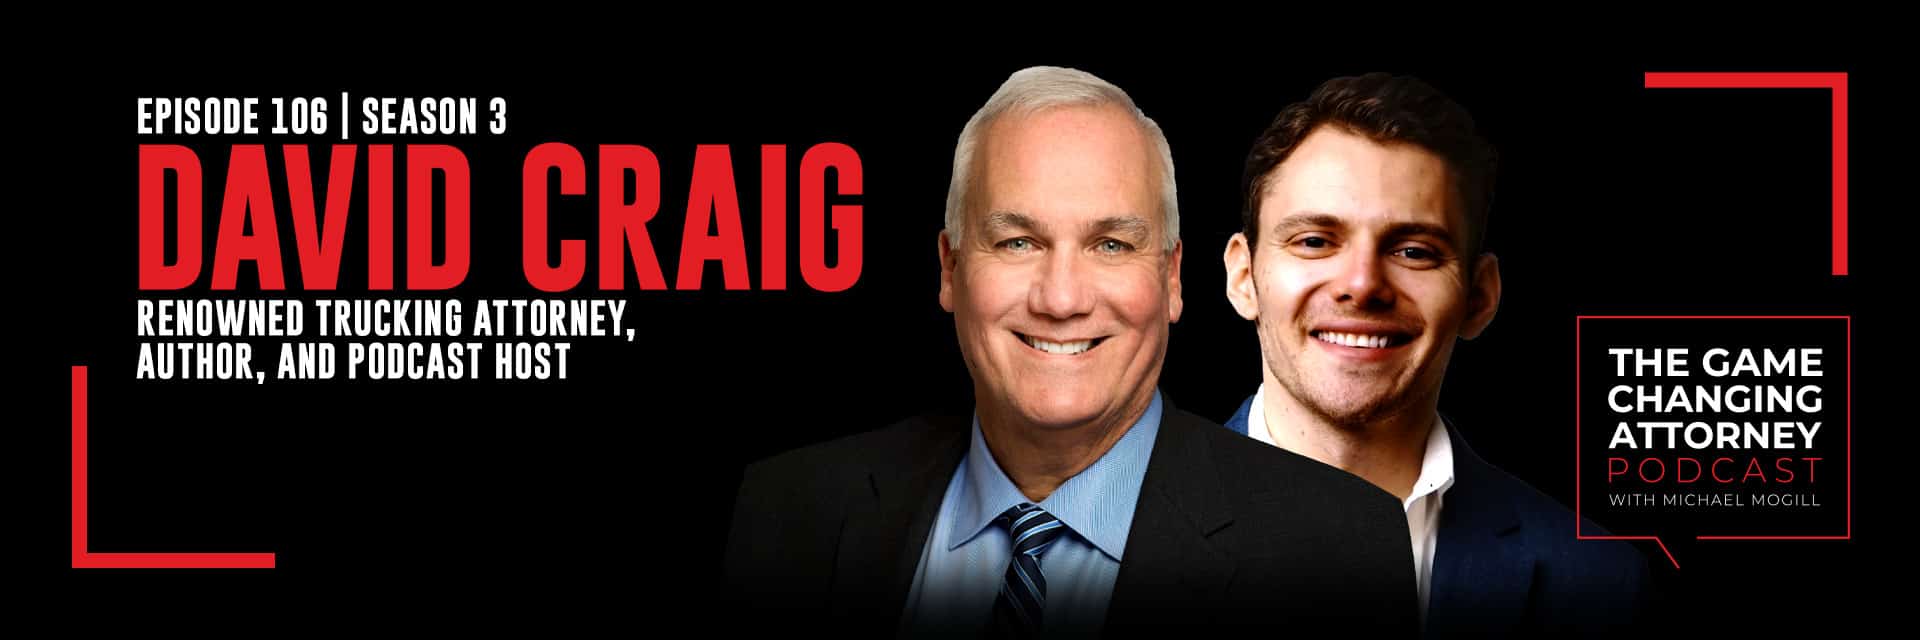 The Game Changing Attorney Podcast - David Craig